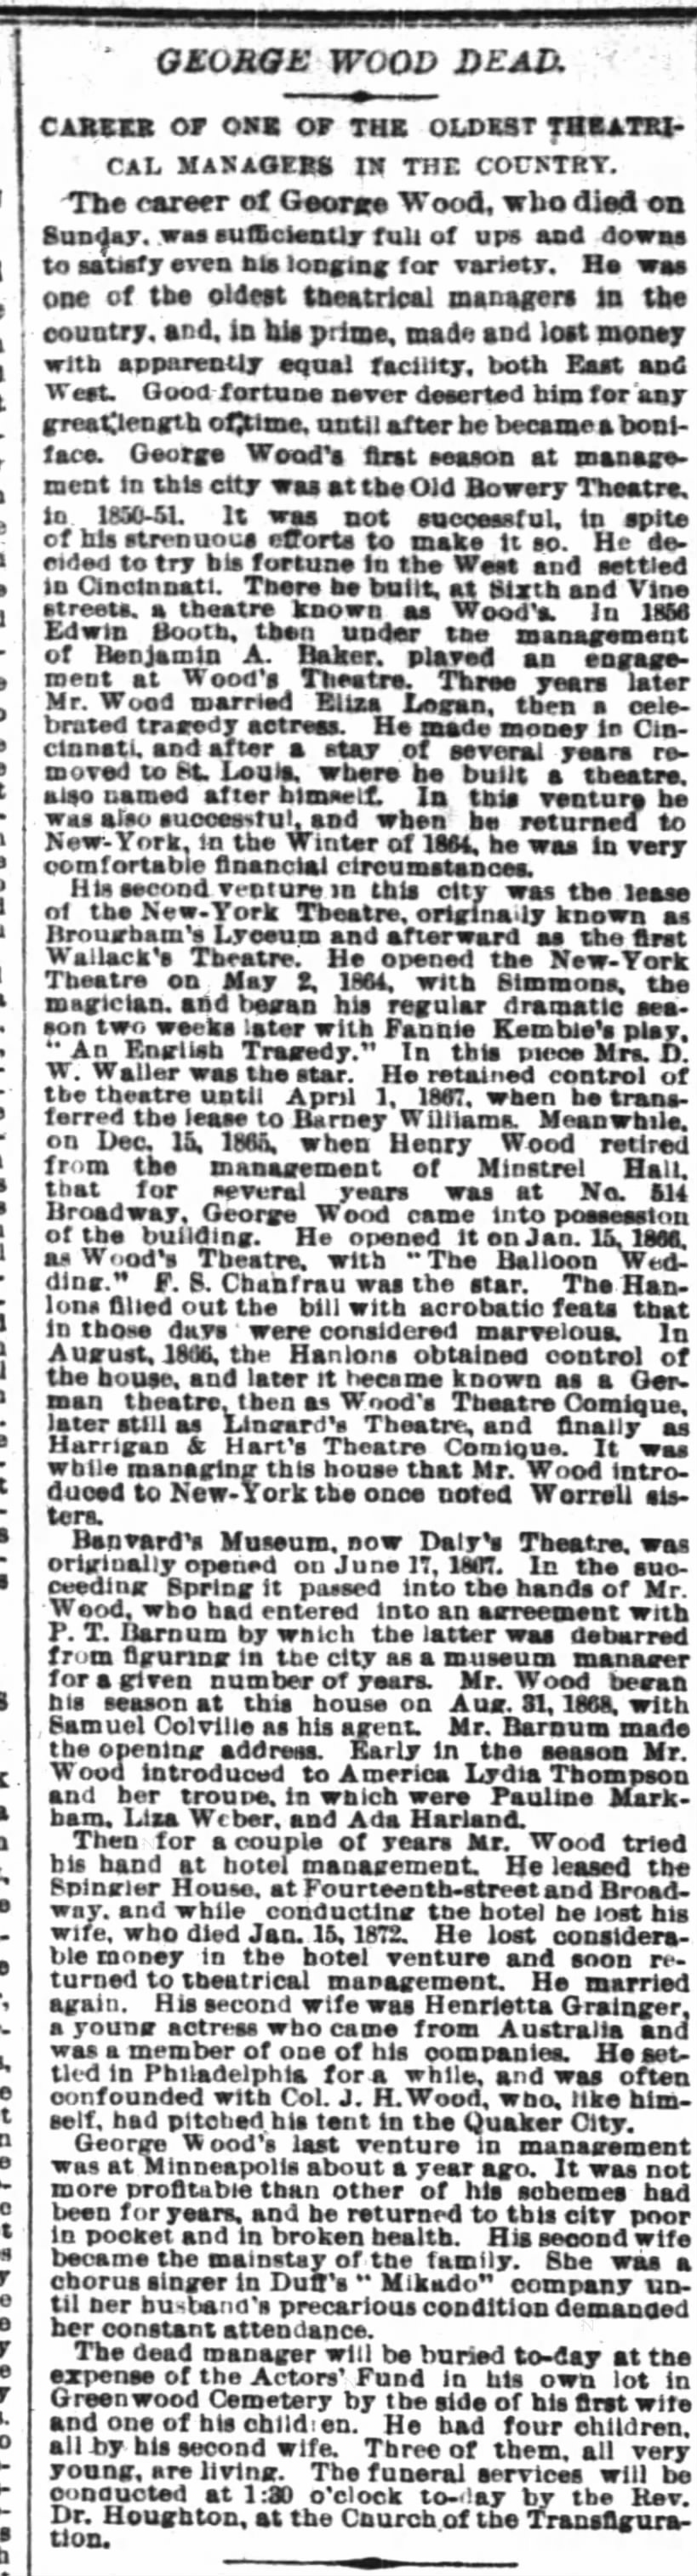 George Wood Theatrical
18 May 1886 NY Times